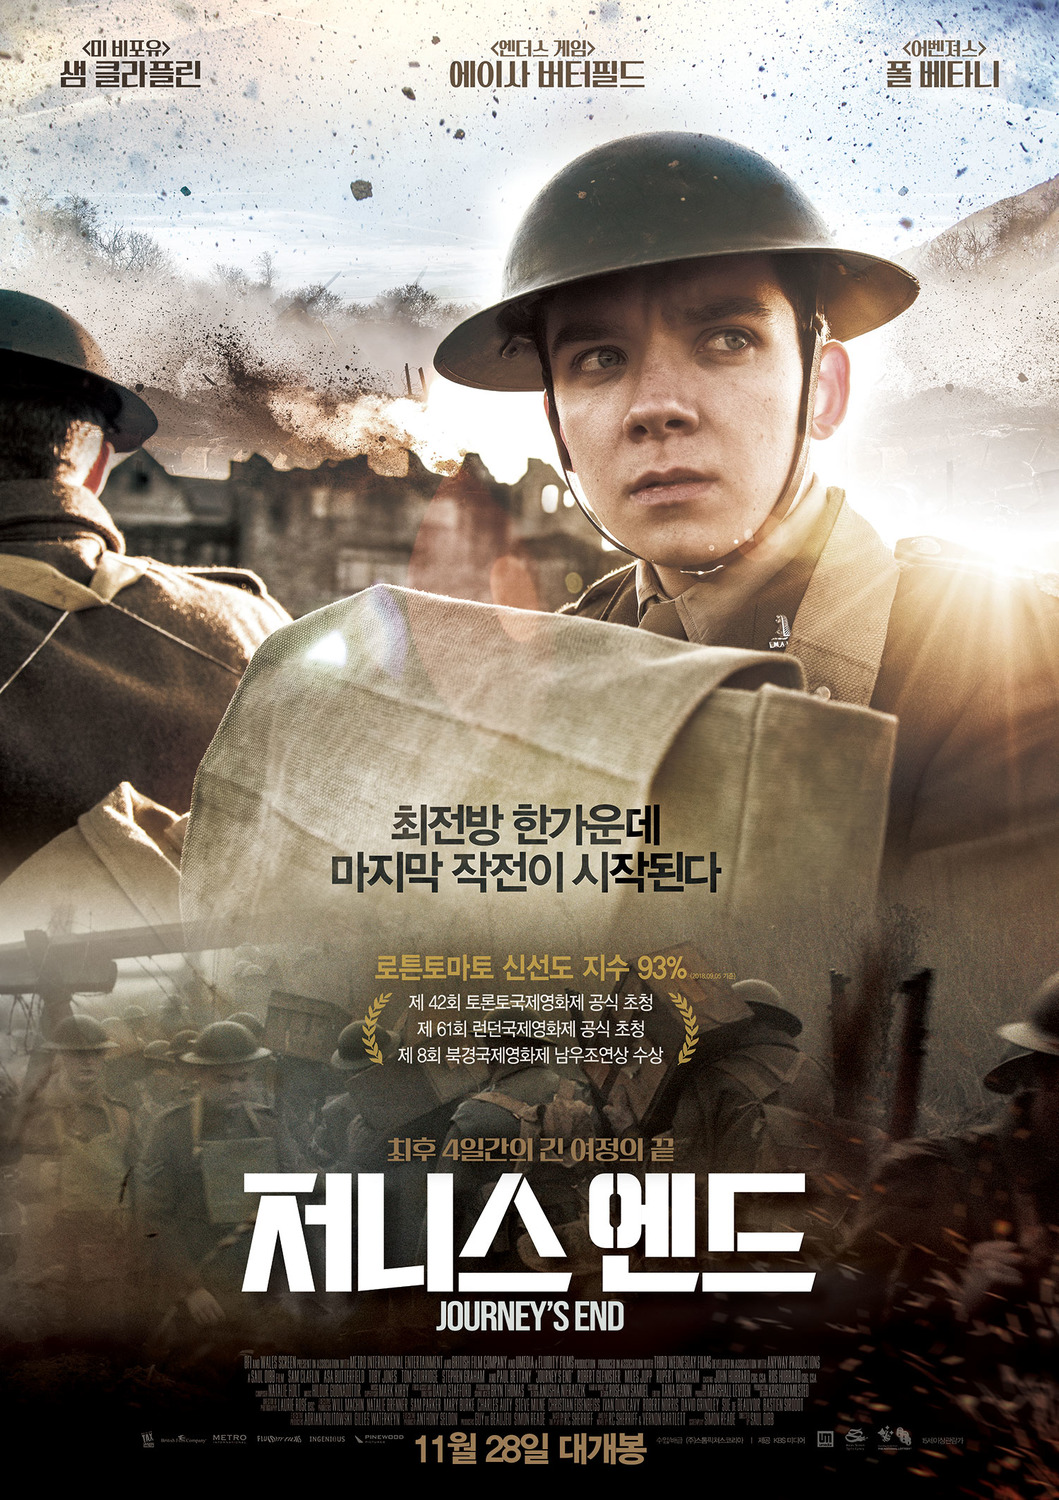 Extra Large Movie Poster Image for Journey's End (#8 of 8)